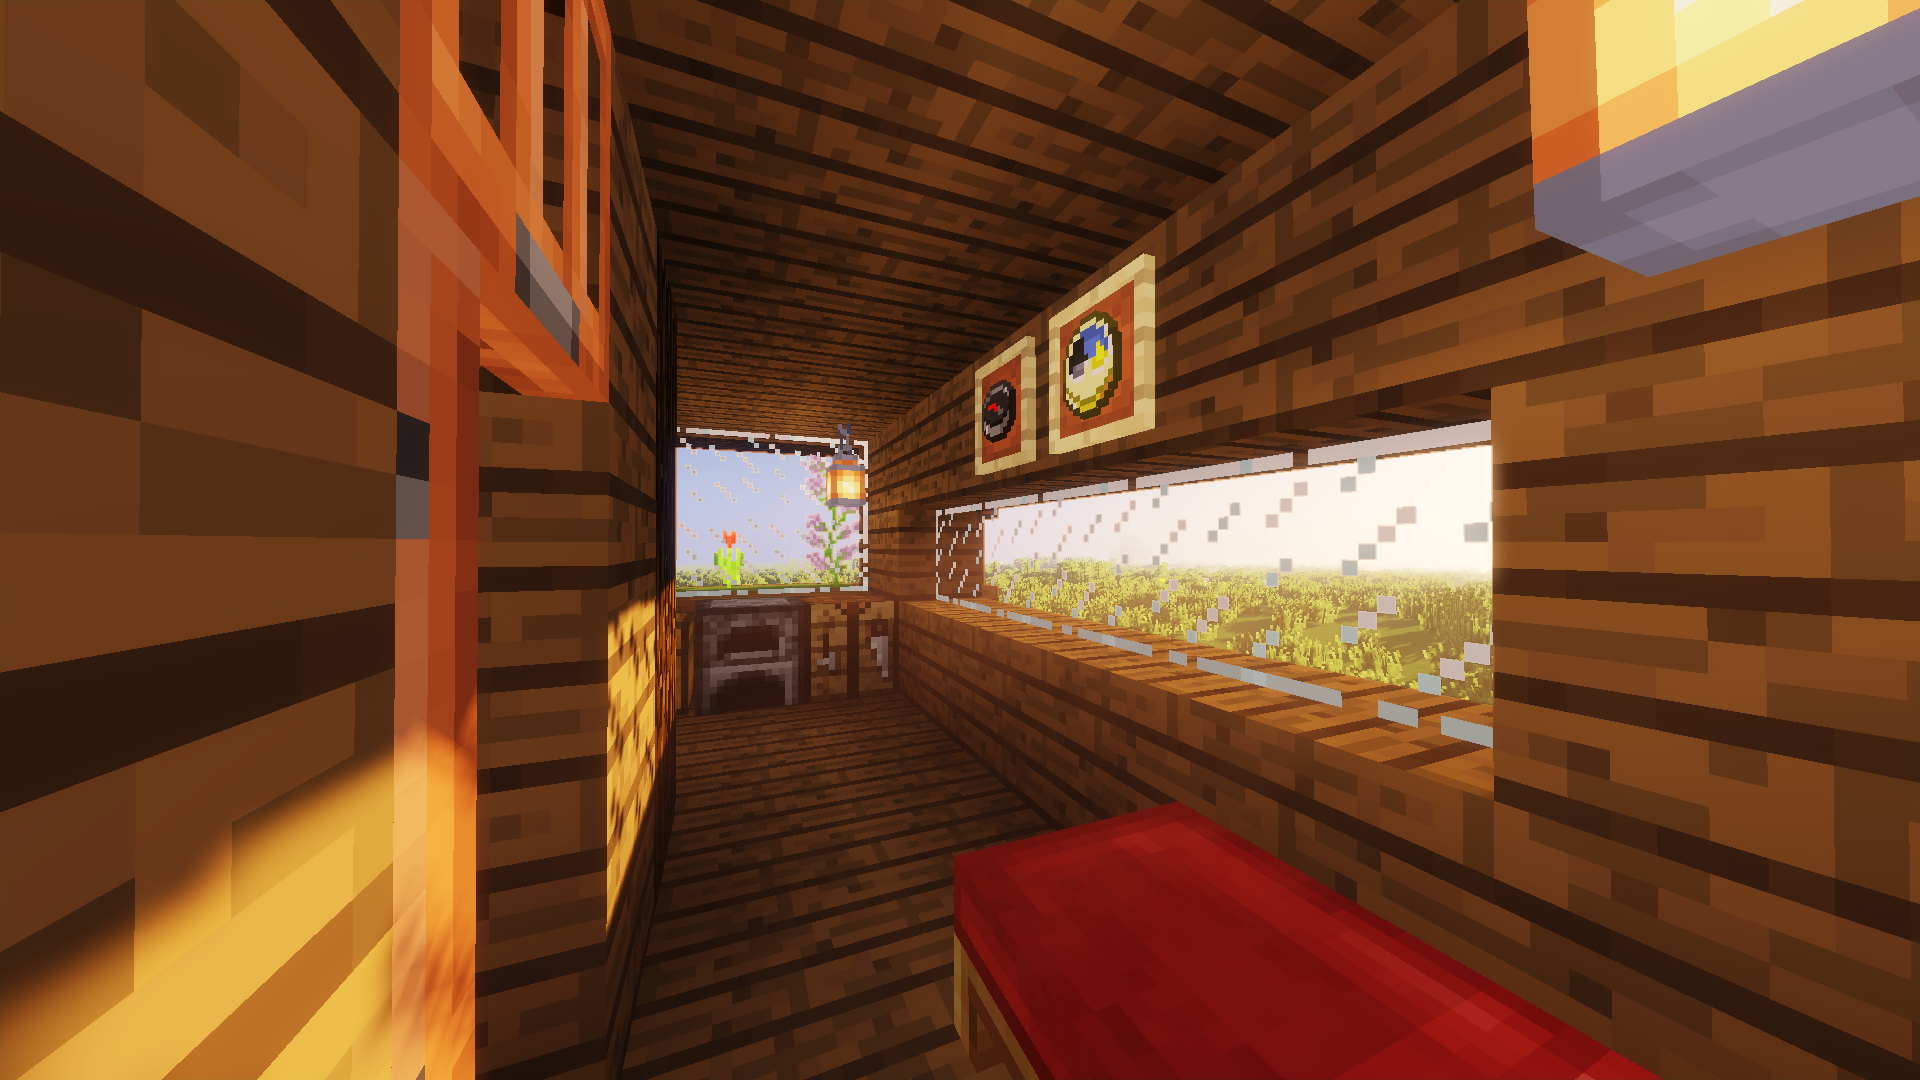 General 1920x1080 Minecraft shaders daylight calm video games Mojang video game art interior wood bed CGI window compass